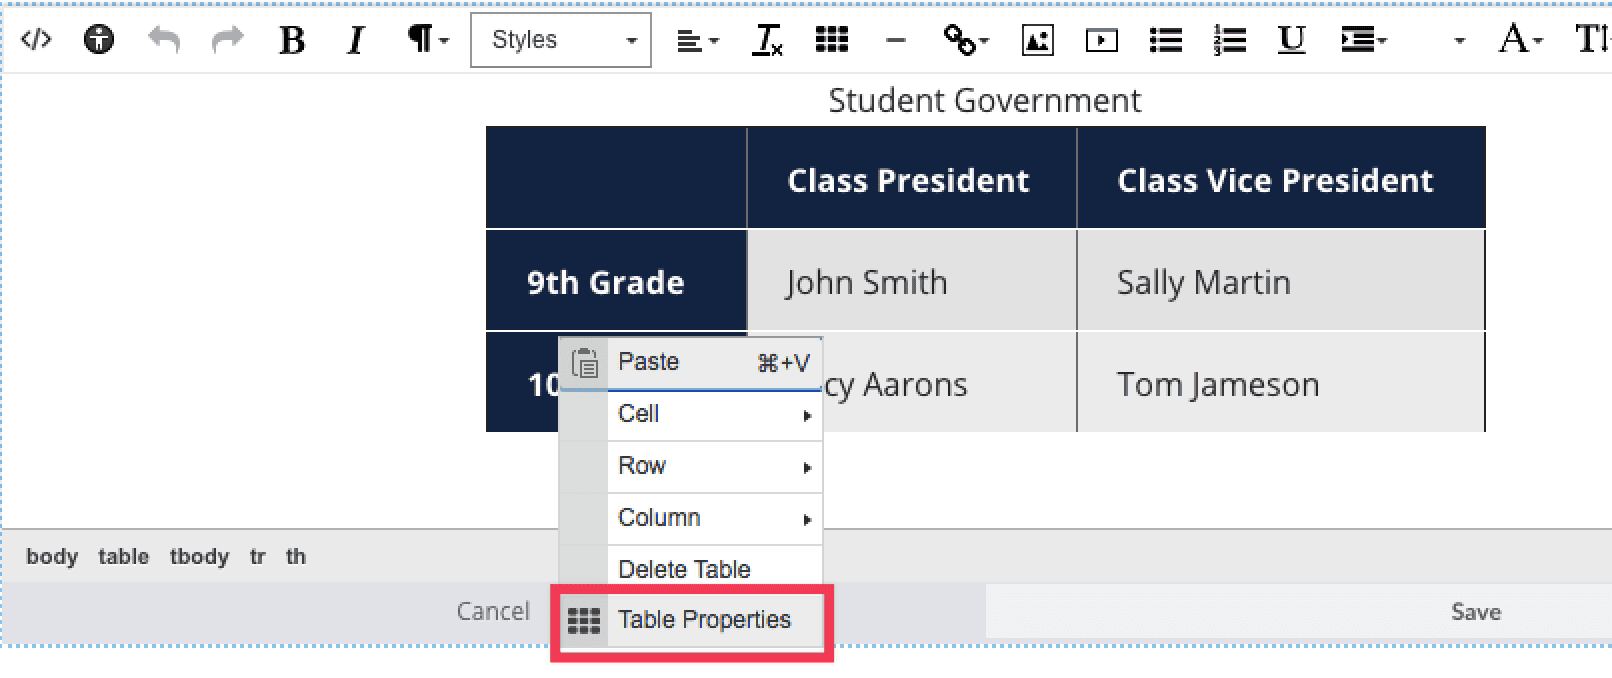 Table Properties button